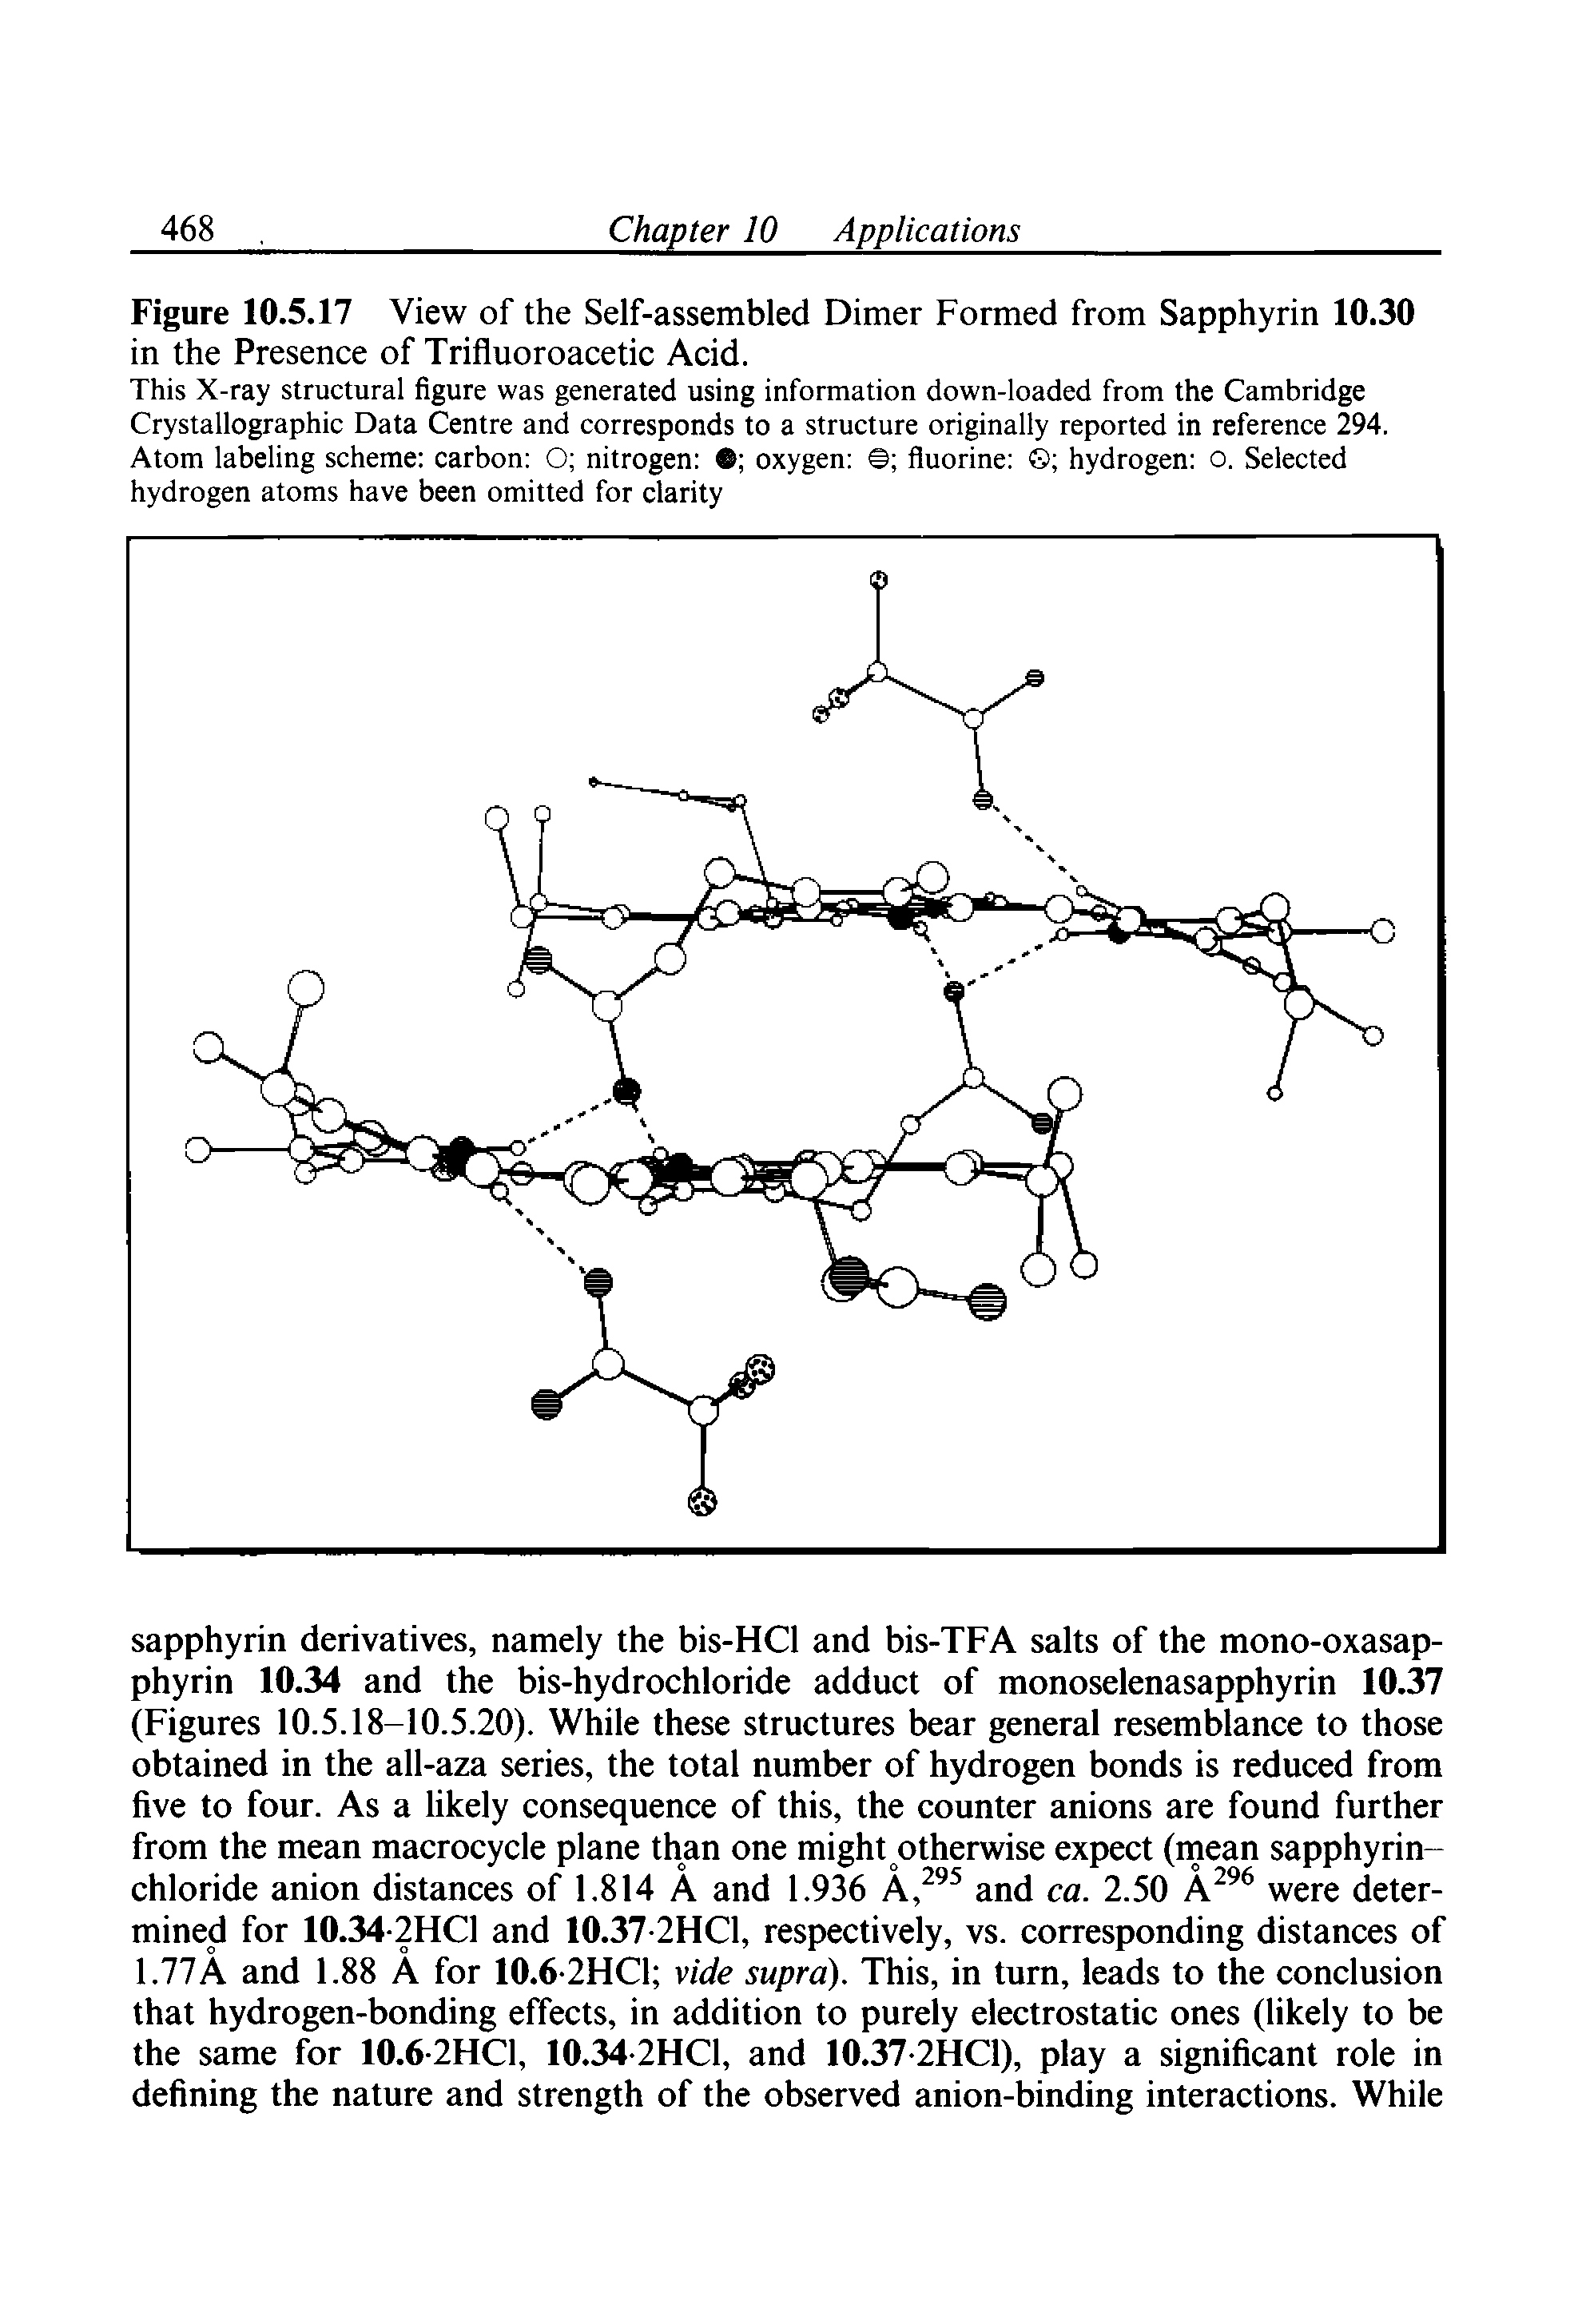 Figure 10.5.17 View of the Self-assembled Dimer Formed from Sapphyrin 10.30 in the Presence of Trifluoroacetic Acid.